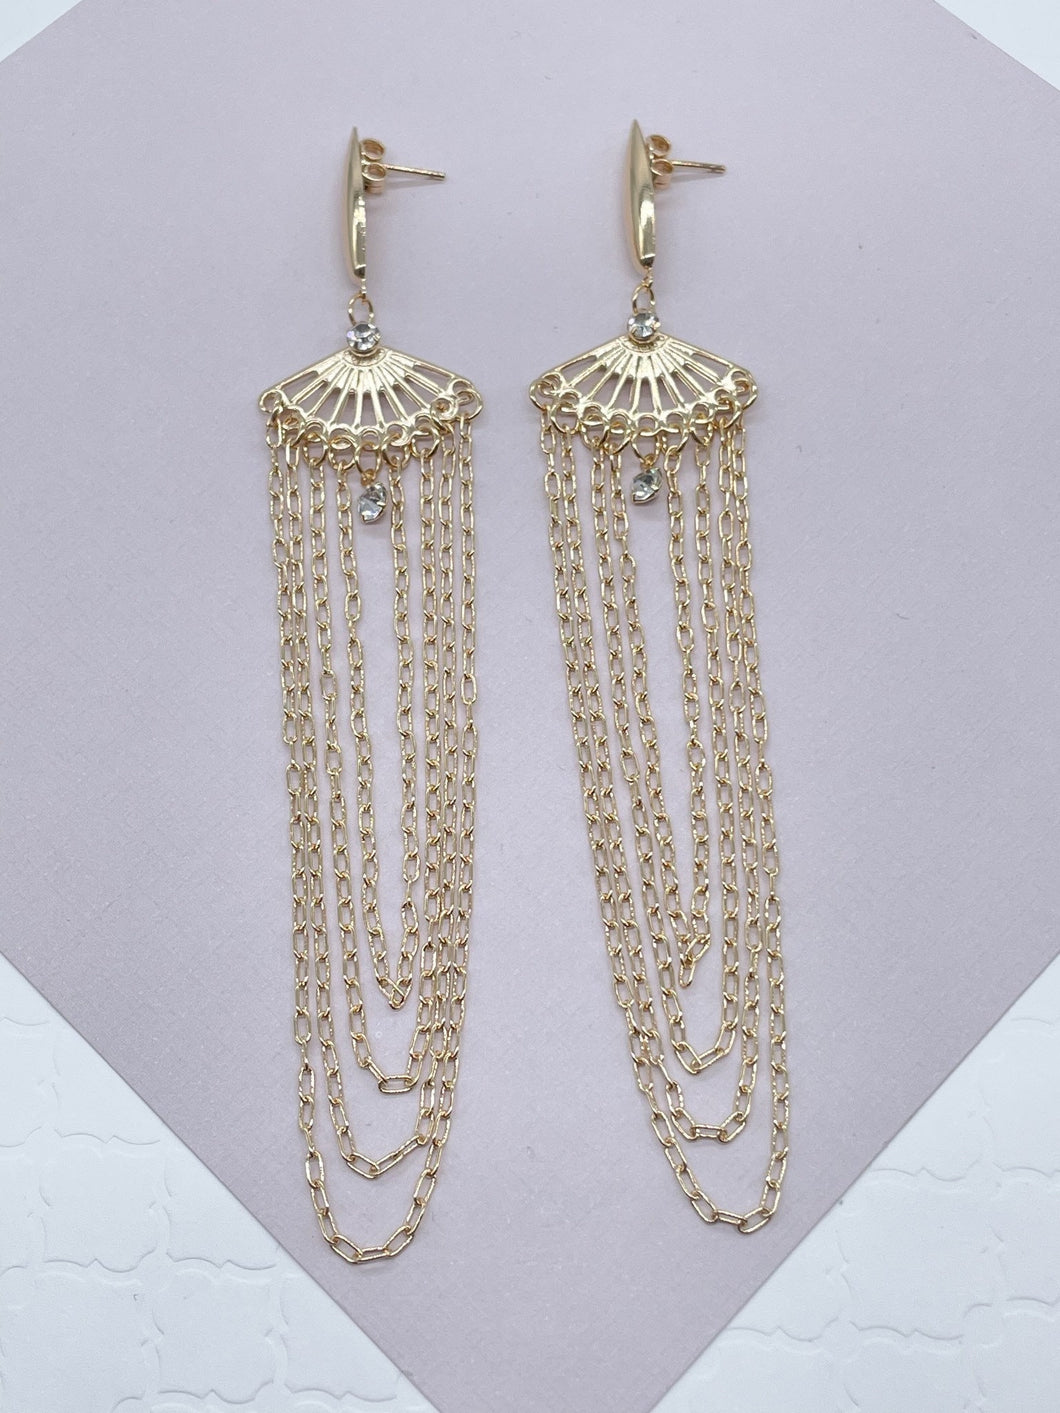 Very Long 18k Gold Filled Light Chandelier Dangling Earrings In a Pape Clip Thin Chain Featuring Cubic Zirconia Details